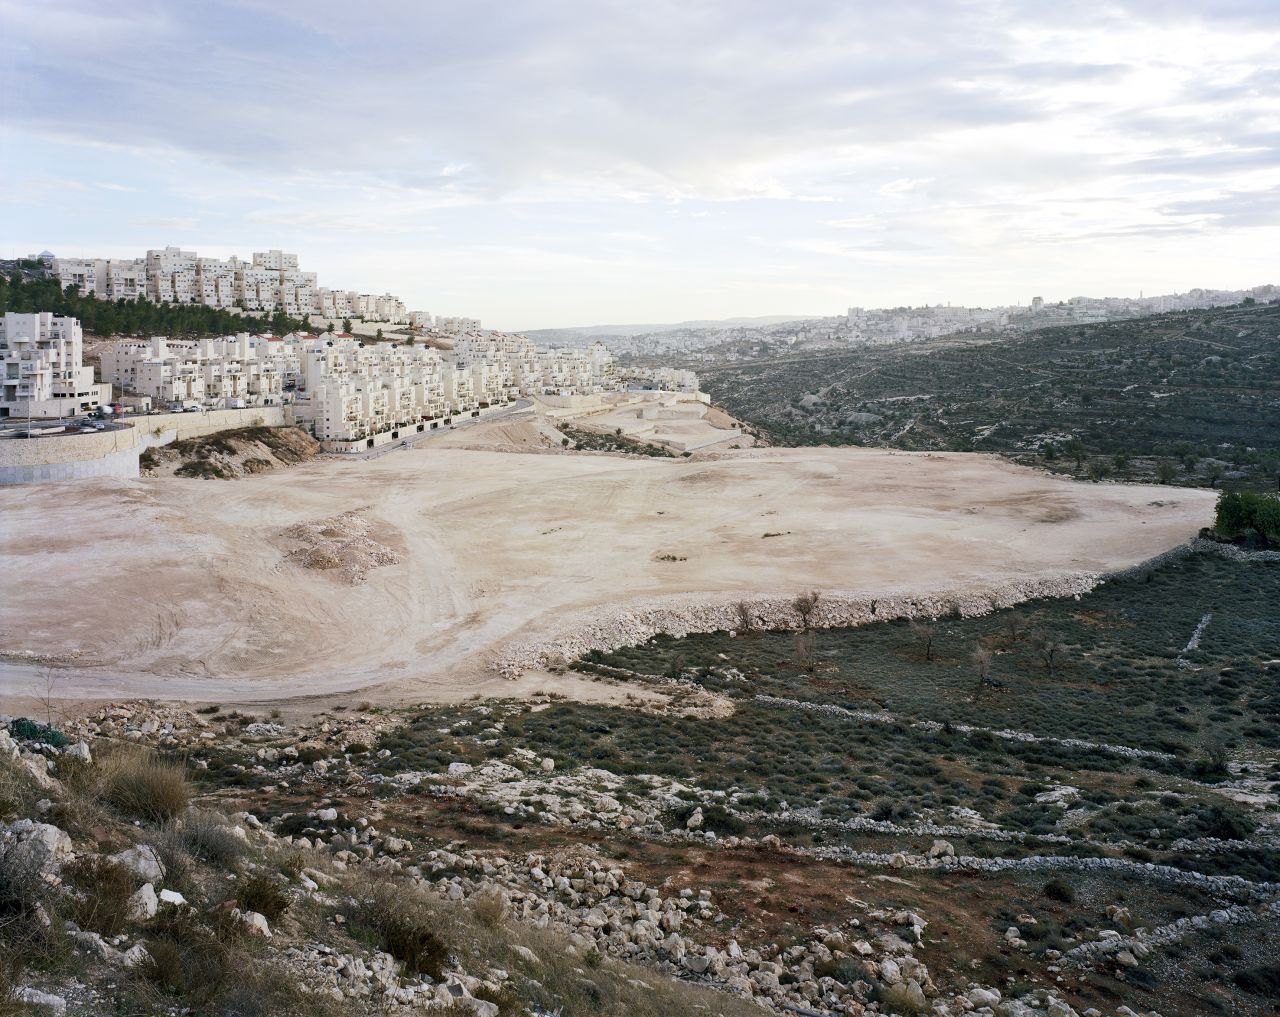 Struth took one final trip specifically to take this photograph of the Har Homa settlement.